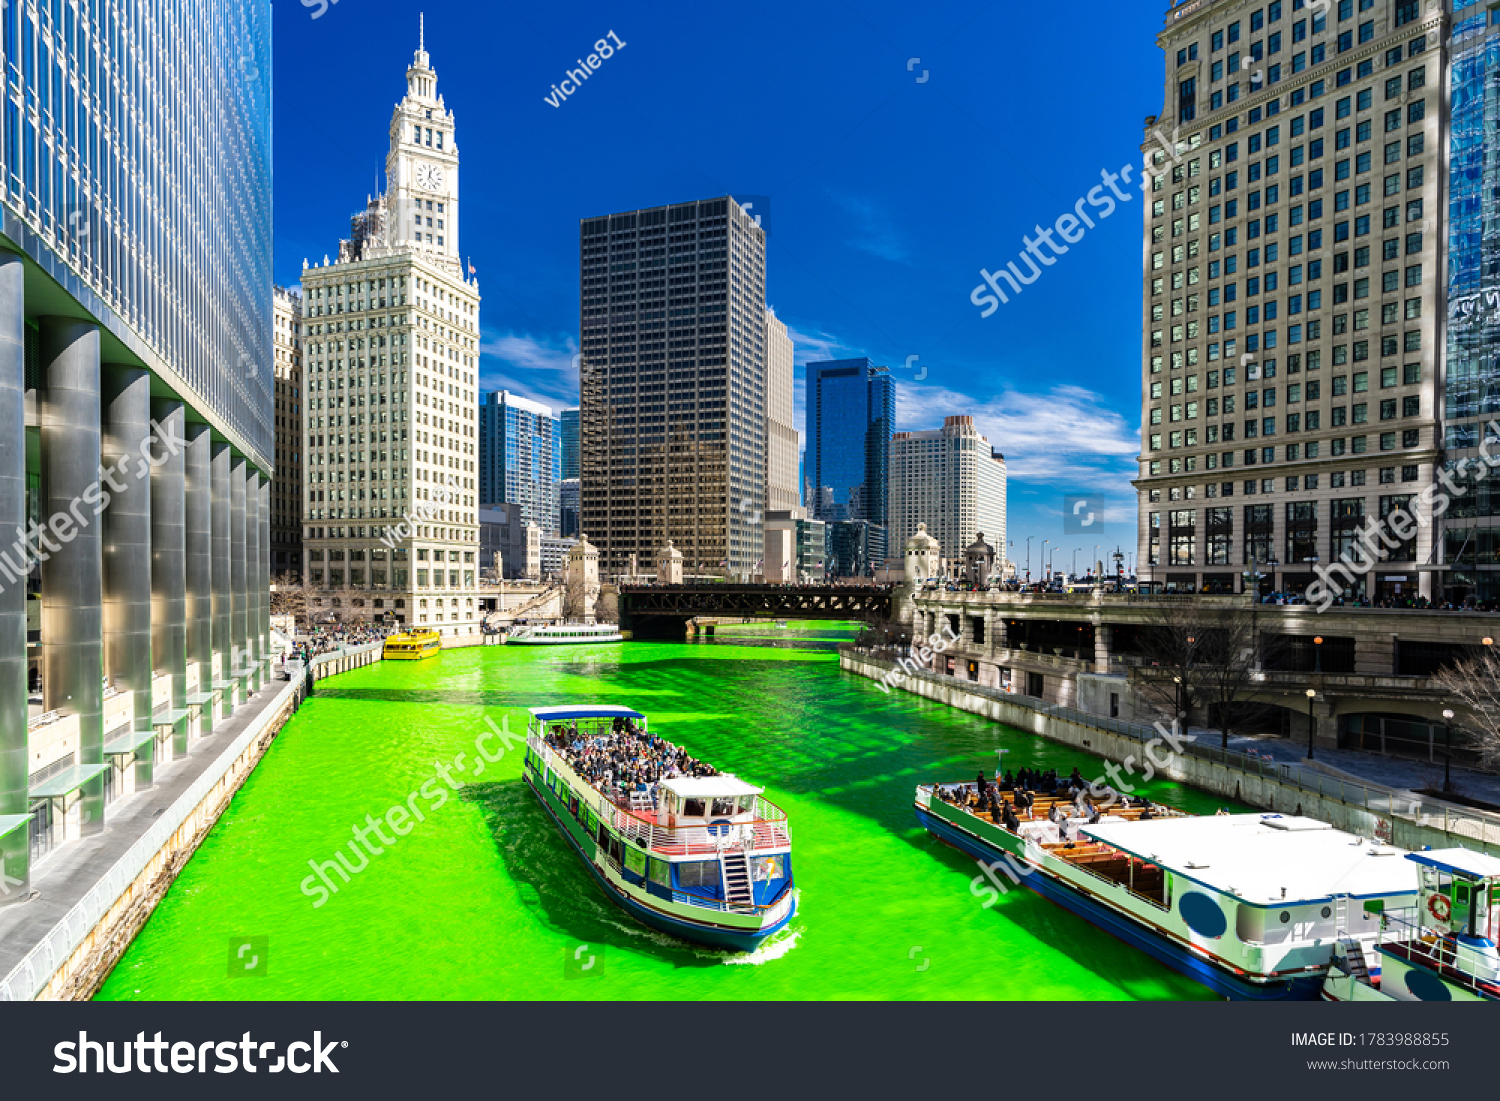 Chicago Skylines building along green dyeing river of Chicago River on St. Patrick's day festival in Chicago Downtown IL USA #1783988855